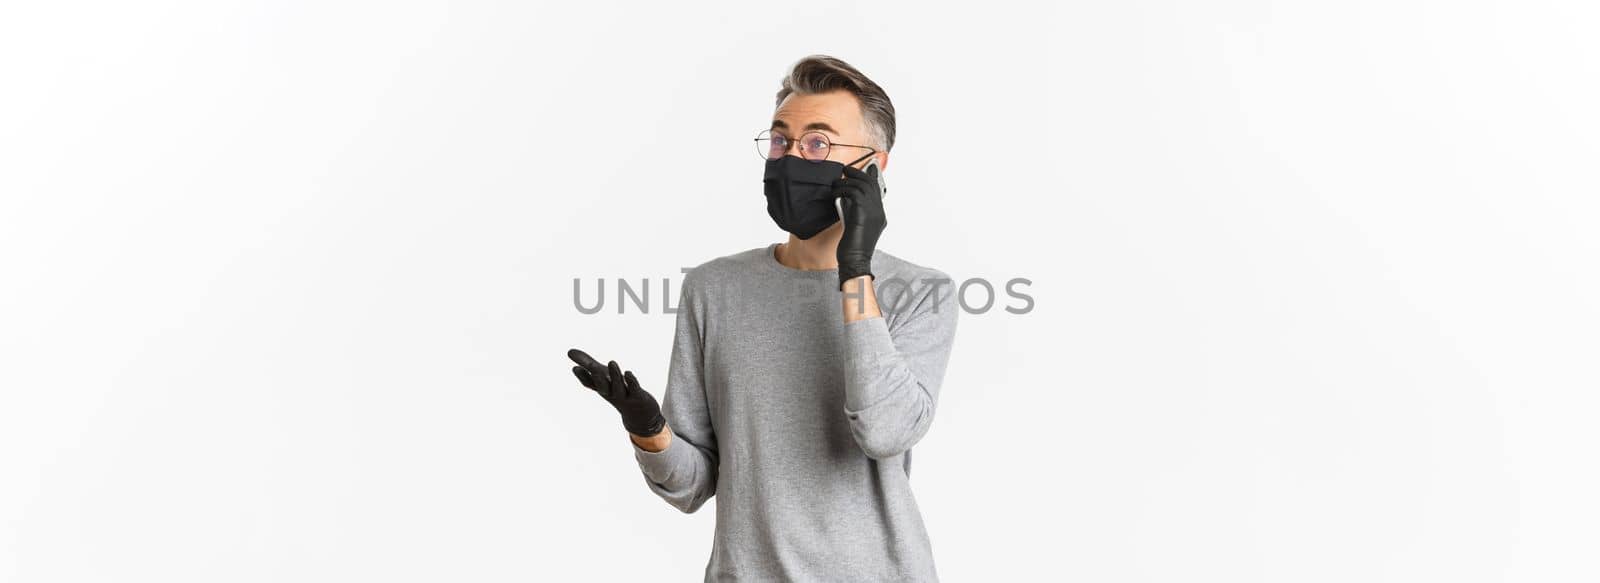 Concept of covid-19, social distancing and lifestyle. Image of handsome middle-aged man in medical mask and gloves, talking on mobile phone, standing over white background.